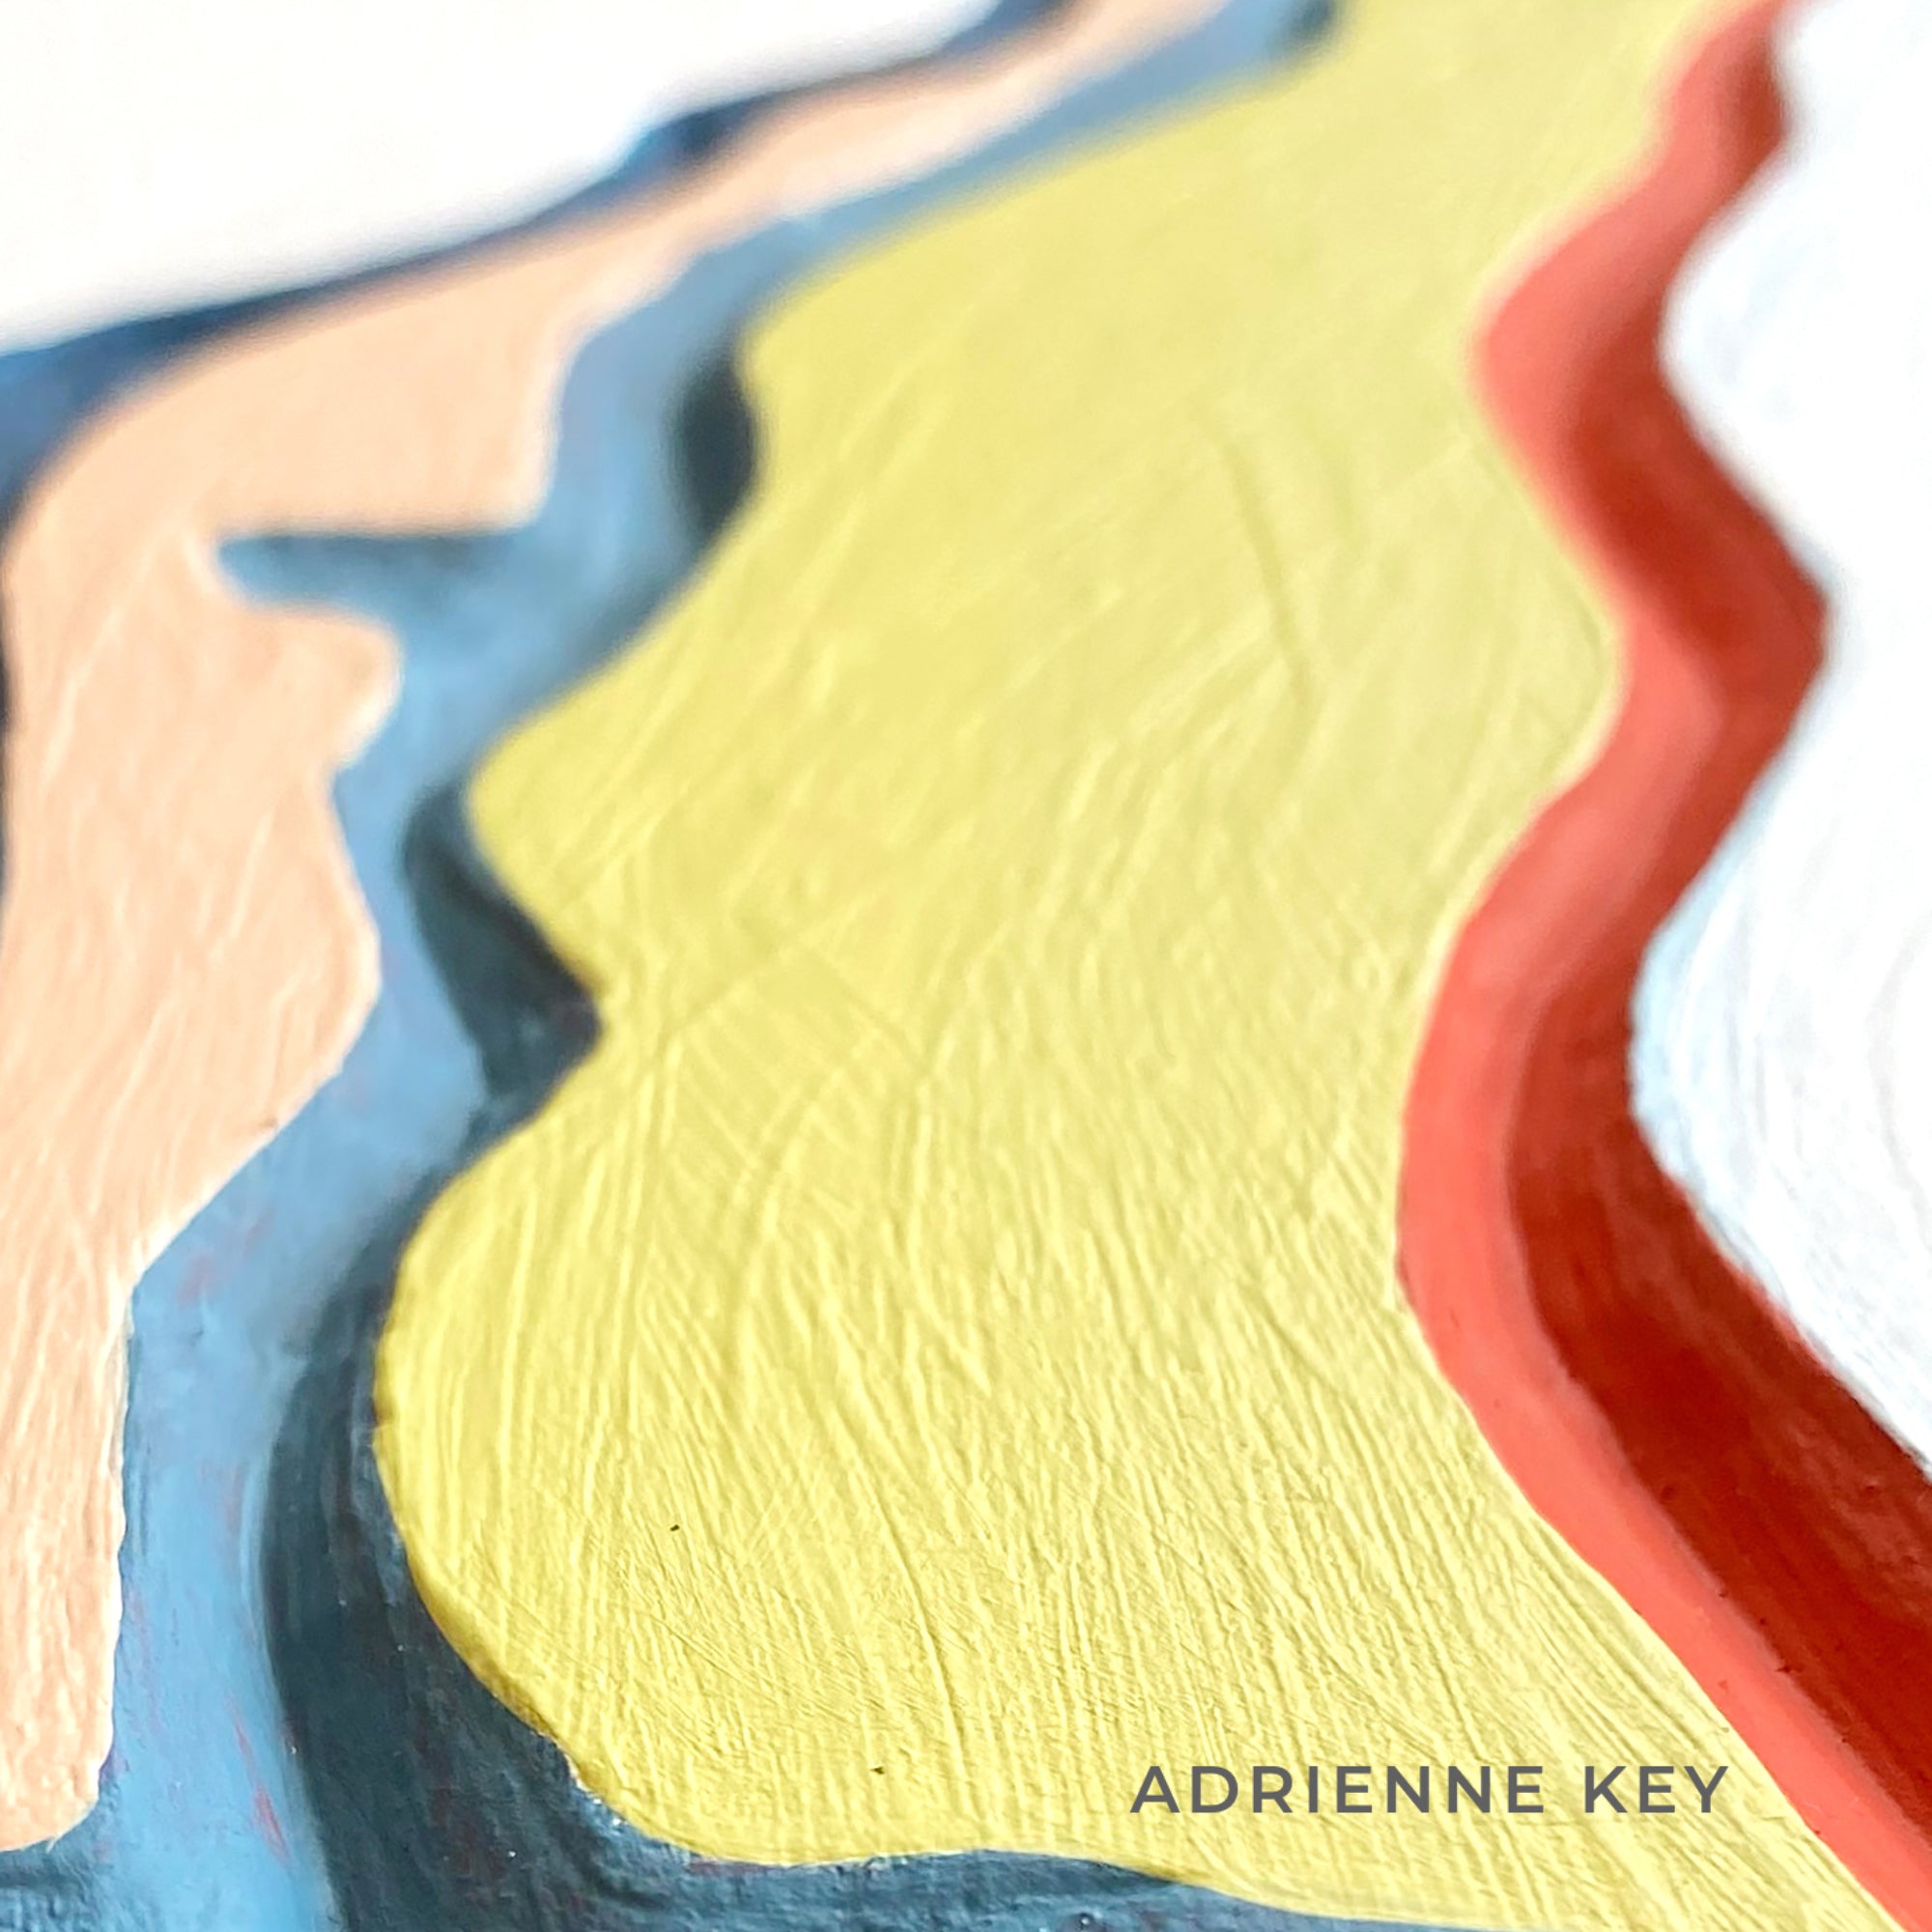 Detail of a hand carved wood artwork with bright painted colors